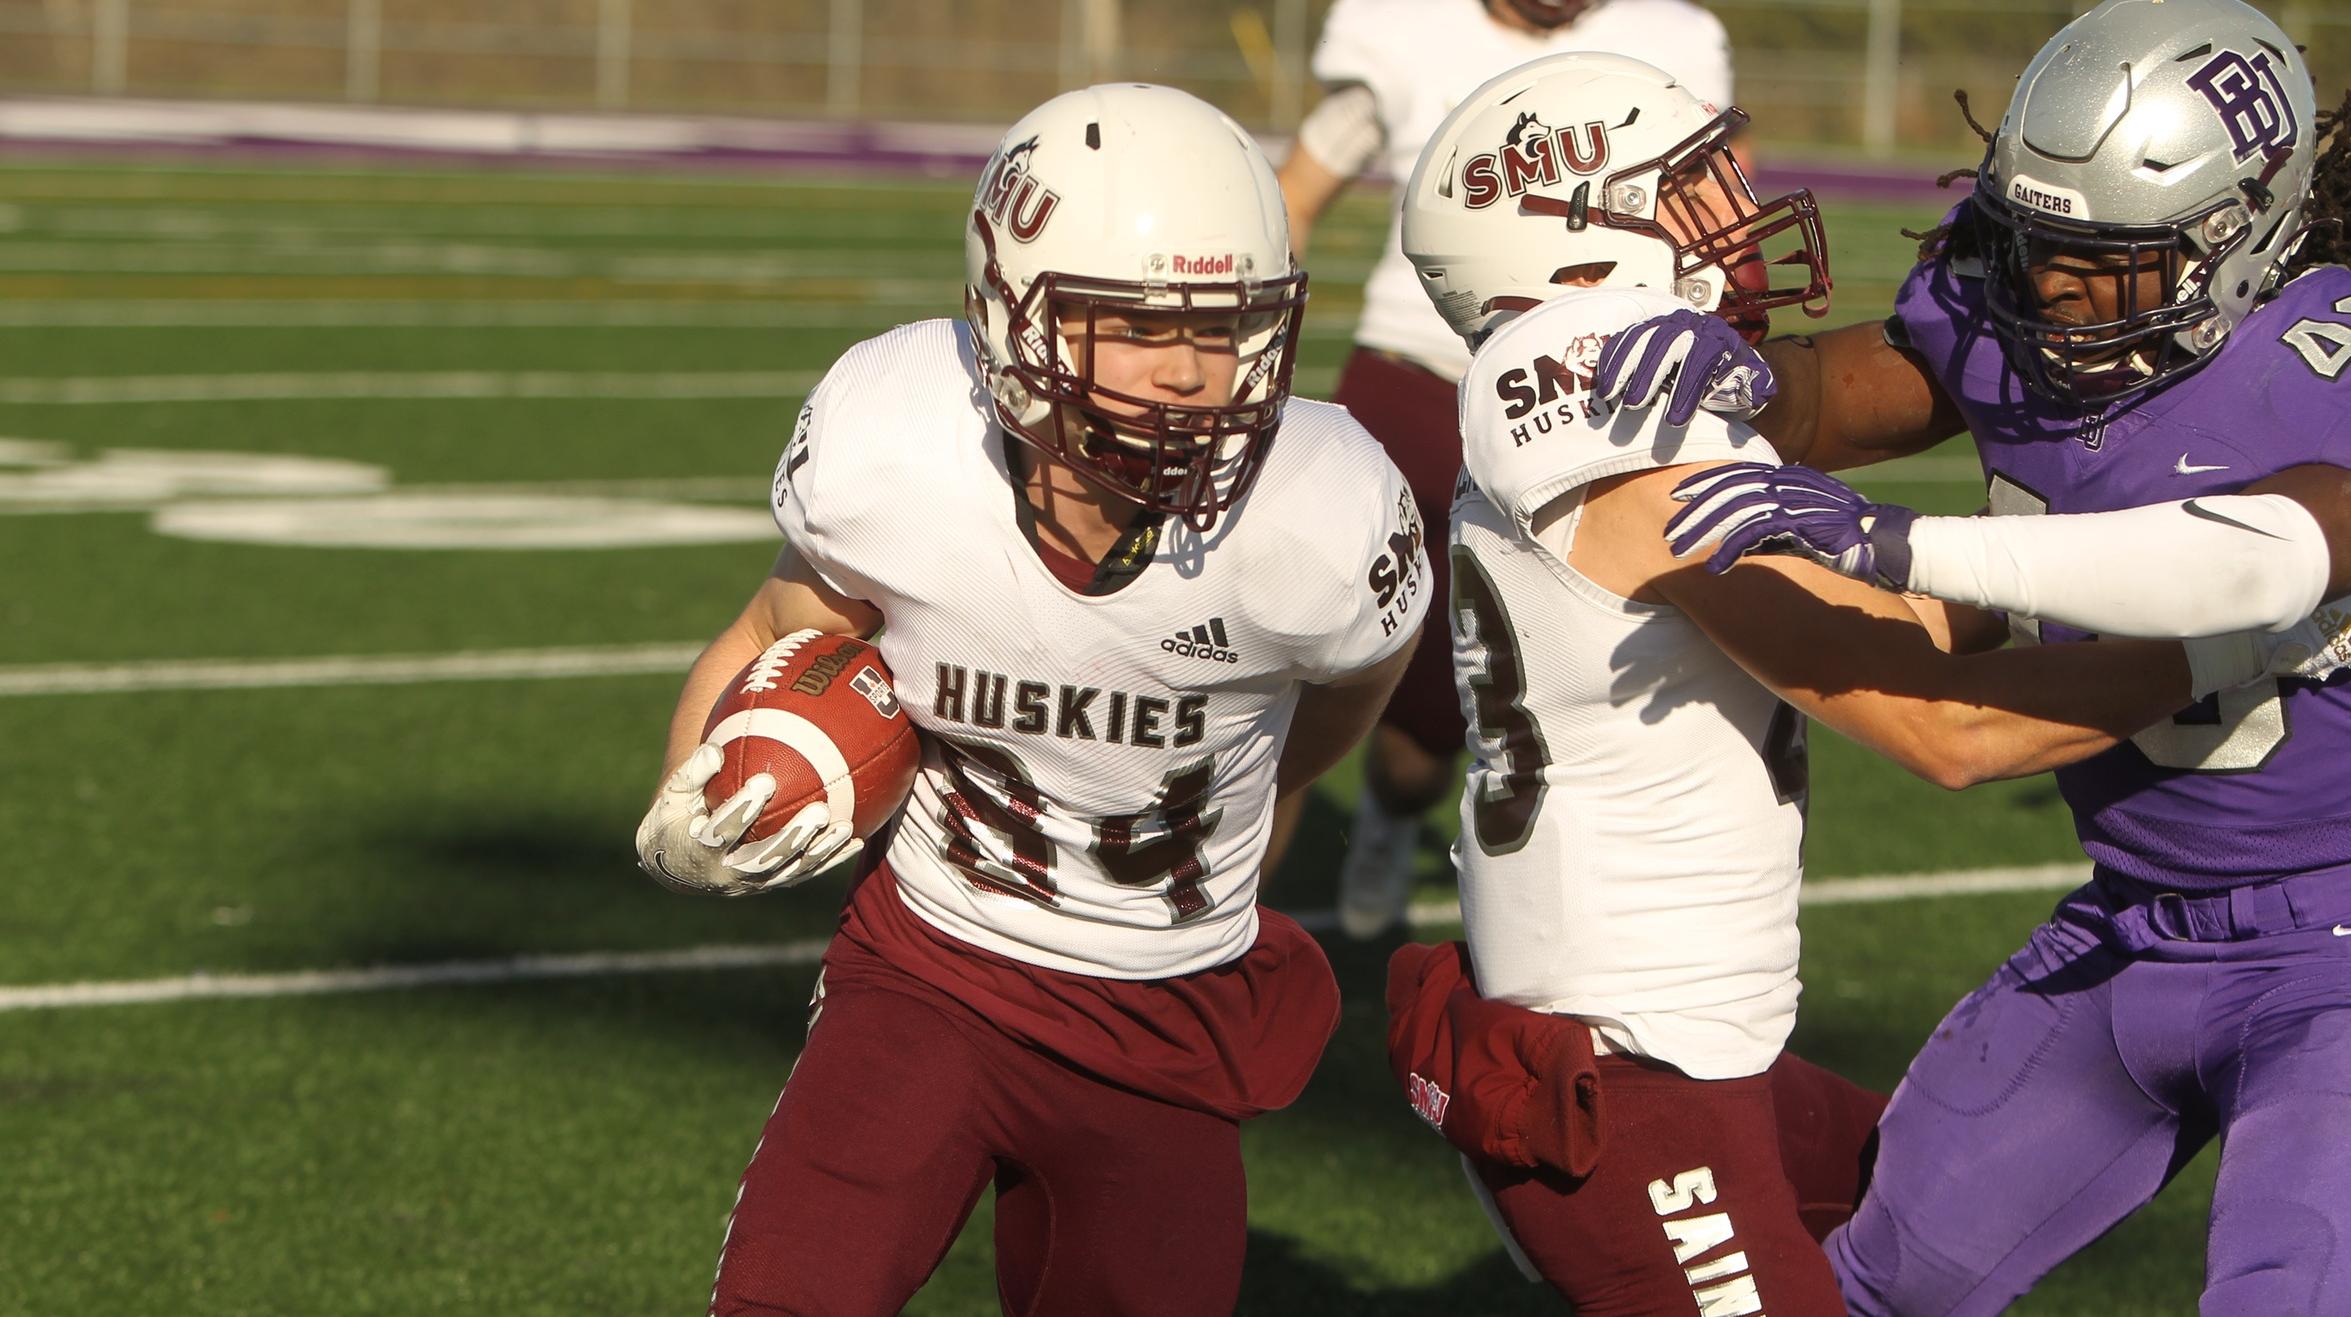 Chaloux runs past Huskies as Bishop’s secure playoff spot